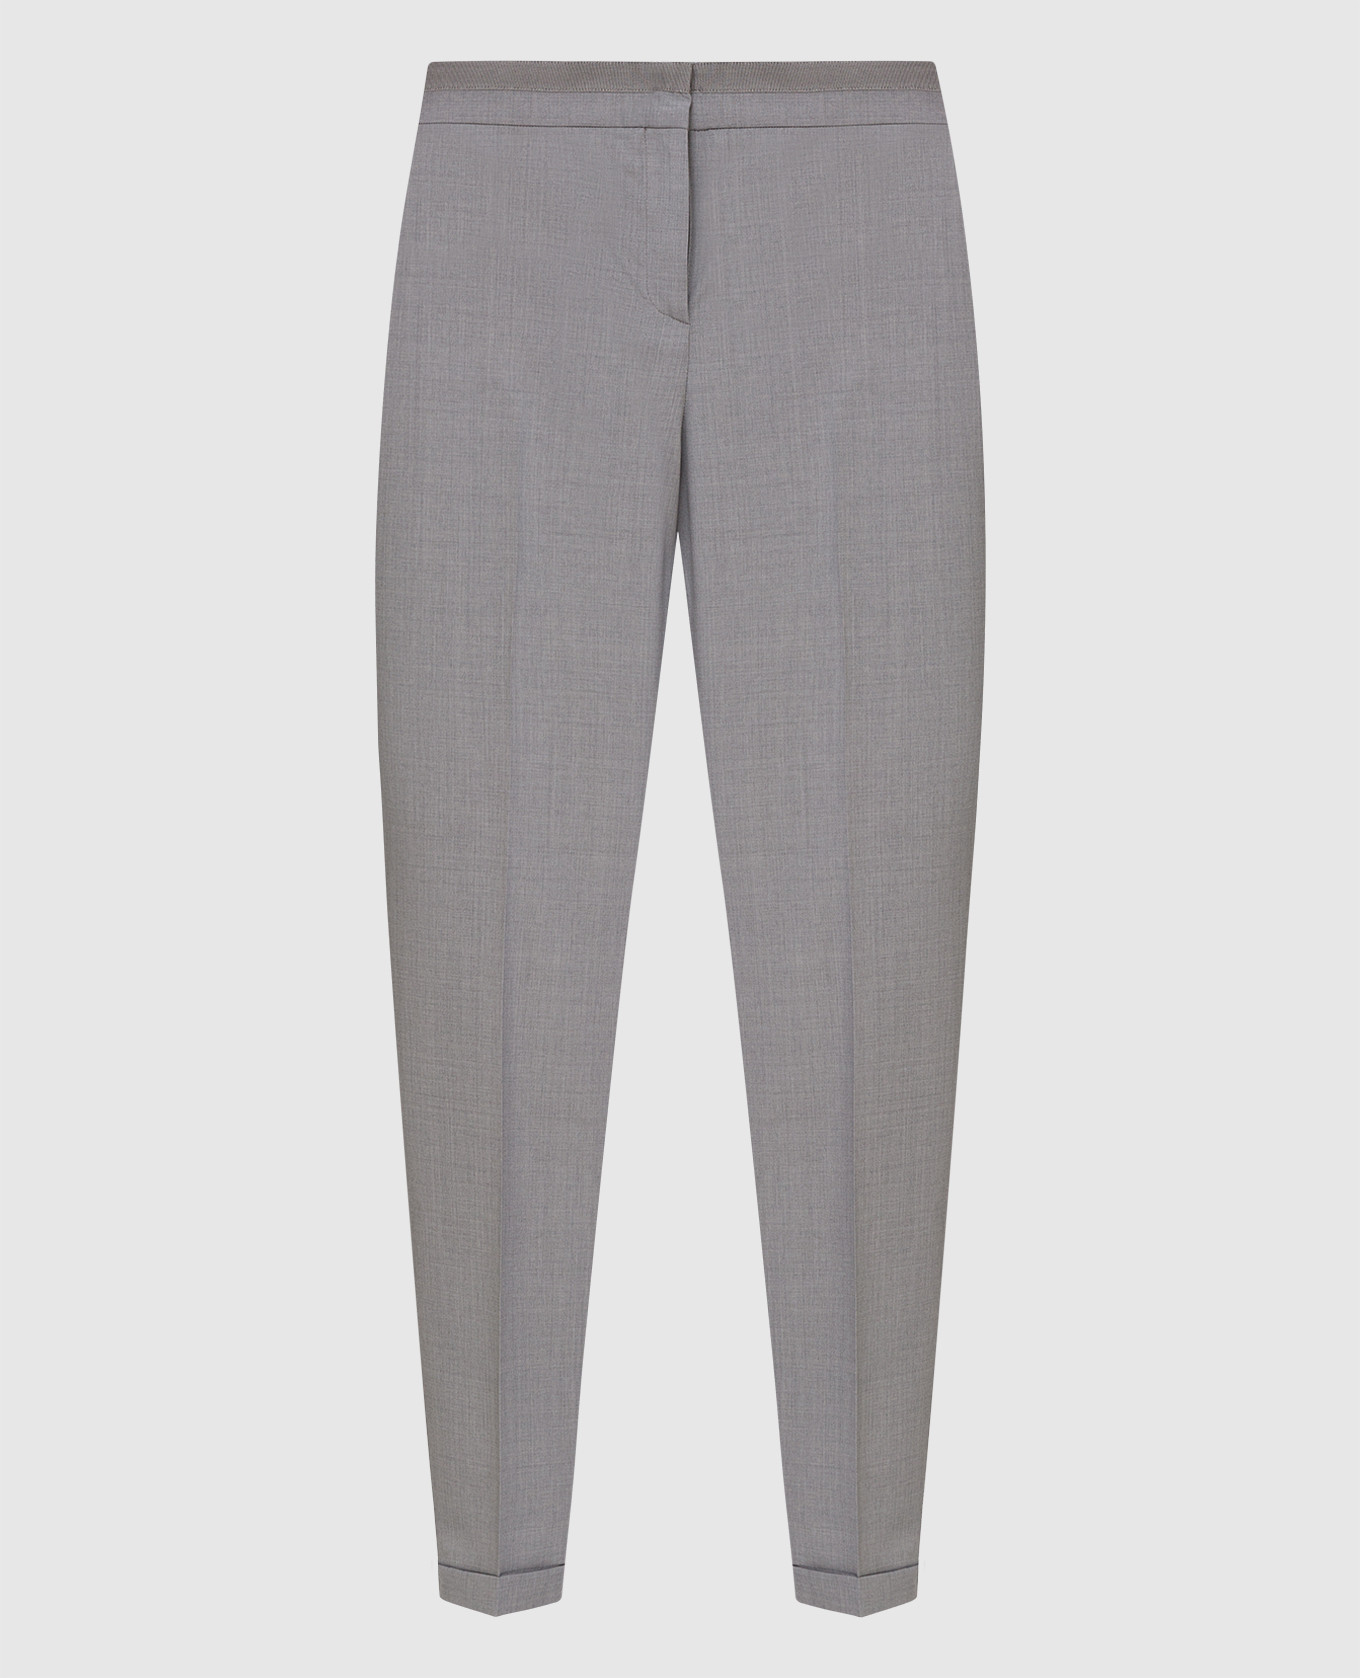 Gray wool trousers